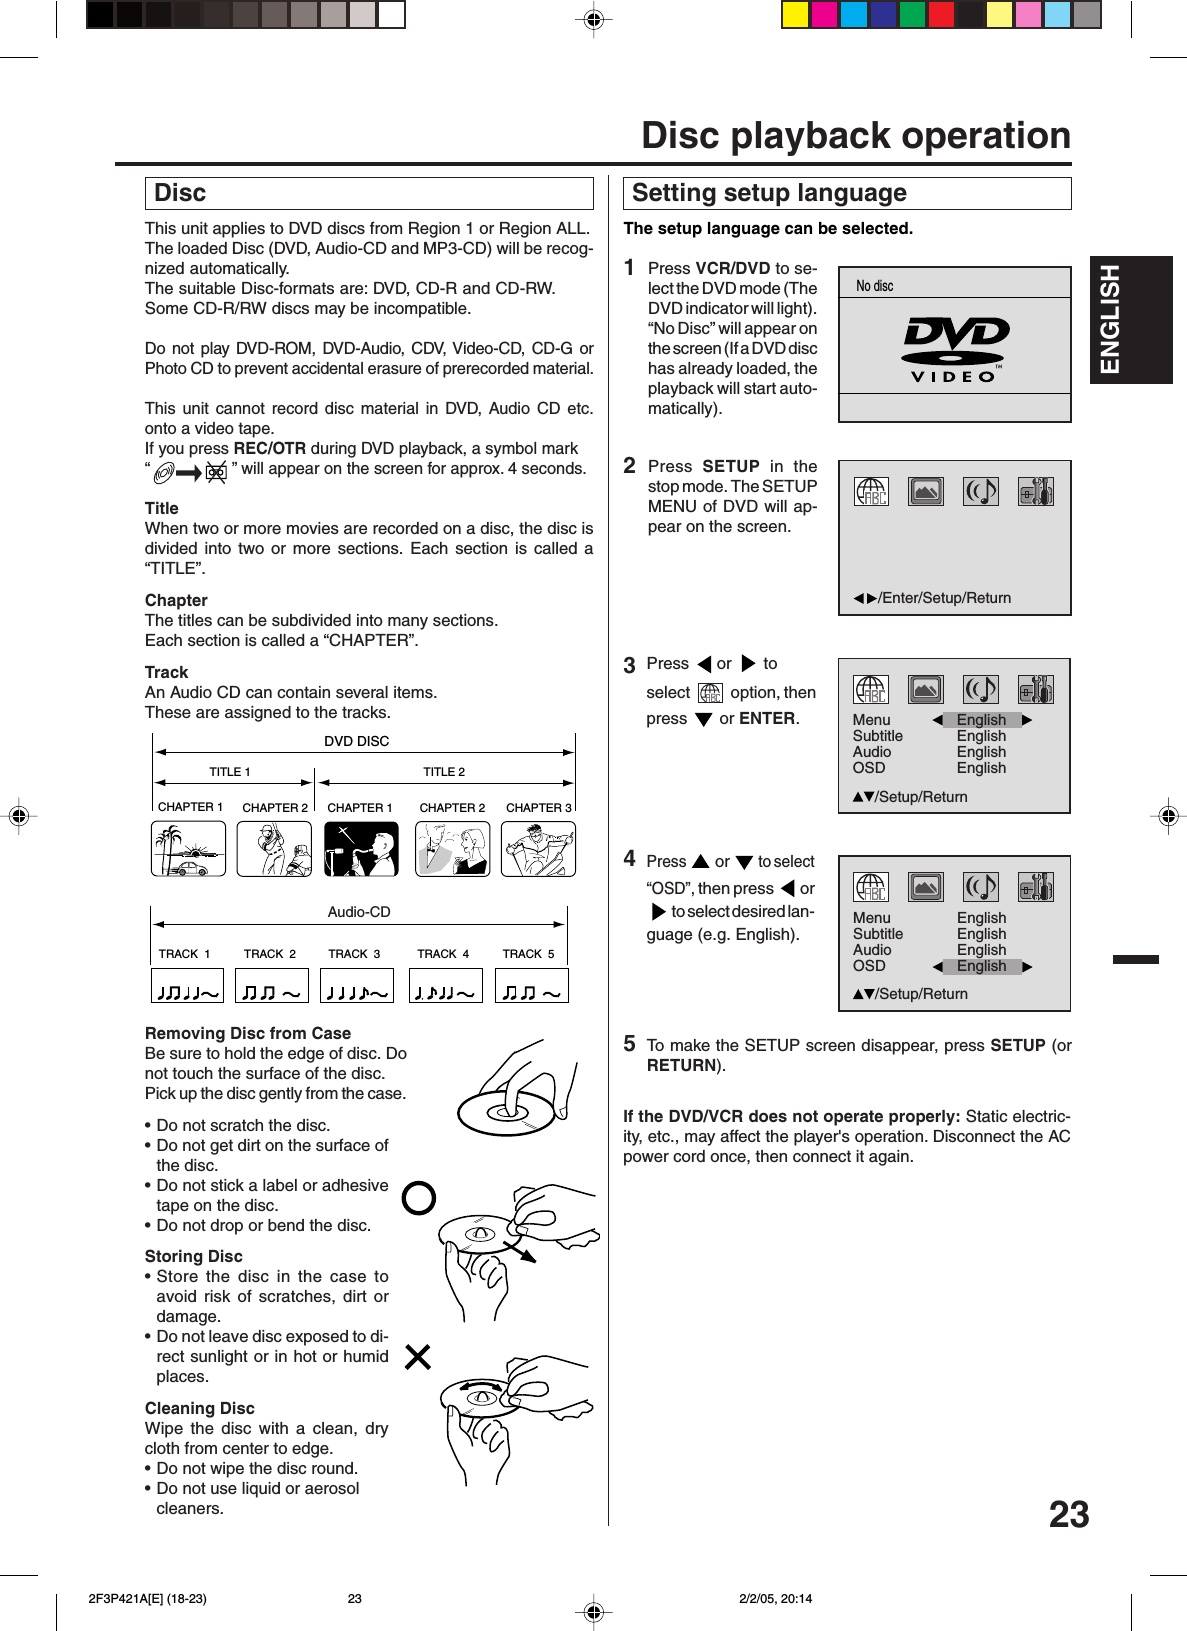 23ENGLISHENGLISHThis unit applies to DVD discs from Region 1 or Region ALL.The loaded Disc (DVD, Audio-CD and MP3-CD) will be recog-nized automatically.The suitable Disc-formats are: DVD, CD-R and CD-RW.Some CD-R/RW discs may be incompatible.Do not play DVD-ROM, DVD-Audio, CDV, Video-CD, CD-G orPhoto CD to prevent accidental erasure of prerecorded material.This unit cannot record disc material in DVD, Audio CD etc.onto a video tape.If you press REC/OTR during DVD playback, a symbol mark“                  ” will appear on the screen for approx. 4 seconds.TitleWhen two or more movies are recorded on a disc, the disc isdivided into two or more sections. Each section is called a“TITLE”.ChapterThe titles can be subdivided into many sections.Each section is called a “CHAPTER”.TrackAn Audio CD can contain several items.These are assigned to the tracks.CHAPTER 1TITLE 1 TITLE 2DVD DISCCHAPTER 2 CHAPTER 2 CHAPTER 3CHAPTER 1TRACK  1 TRACK  2 TRACK  3 TRACK  4 TRACK  5CDRemoving Disc from CaseBe sure to hold the edge of disc. Donot touch the surface of the disc.Pick up the disc gently from the case.•Do not scratch the disc.•Do not get dirt on the surface ofthe disc.•Do not stick a label or adhesivetape on the disc.•Do not drop or bend the disc.Storing Disc•Store the disc in the case toavoid risk of scratches, dirt ordamage.•Do not leave disc exposed to di-rect sunlight or in hot or humidplaces.Cleaning DiscWipe the disc with a clean, drycloth from center to edge.•Do not wipe the disc round.•Do not use liquid or aerosolcleaners. DiscAudio-CD Setting setup languageThe setup language can be selected.2Press  SETUP in thestop mode. The SETUPMENU of DVD will ap-pear on the screen.To  make the SETUP screen disappear, press SETUP (orRETURN).If the DVD/VCR does not operate properly: Static electric-ity, etc., may affect the player&apos;s operation. Disconnect the ACpower cord once, then connect it again.4Press  or  to select“OSD”, then press  or to select desired lan-guage (e.g. English).1Press VCR/DVD to se-lect the DVD mode (TheDVD indicator will light).“No Disc” will appear onthe screen (If a DVD dischas already loaded, theplayback will start auto-matically).Disc playback operation5Press  or   toselect   option, thenpress   or ENTER.3/Enter/Setup/ReturnNo discMenuSubtitleAudioOSDEnglishEnglishEnglish/Setup/ReturnEnglishMenuSubtitleAudioOSDEnglishEnglish/Setup/ReturnEnglishEnglish 2F3P421A[E] (18-23) 2/2/05, 20:1423